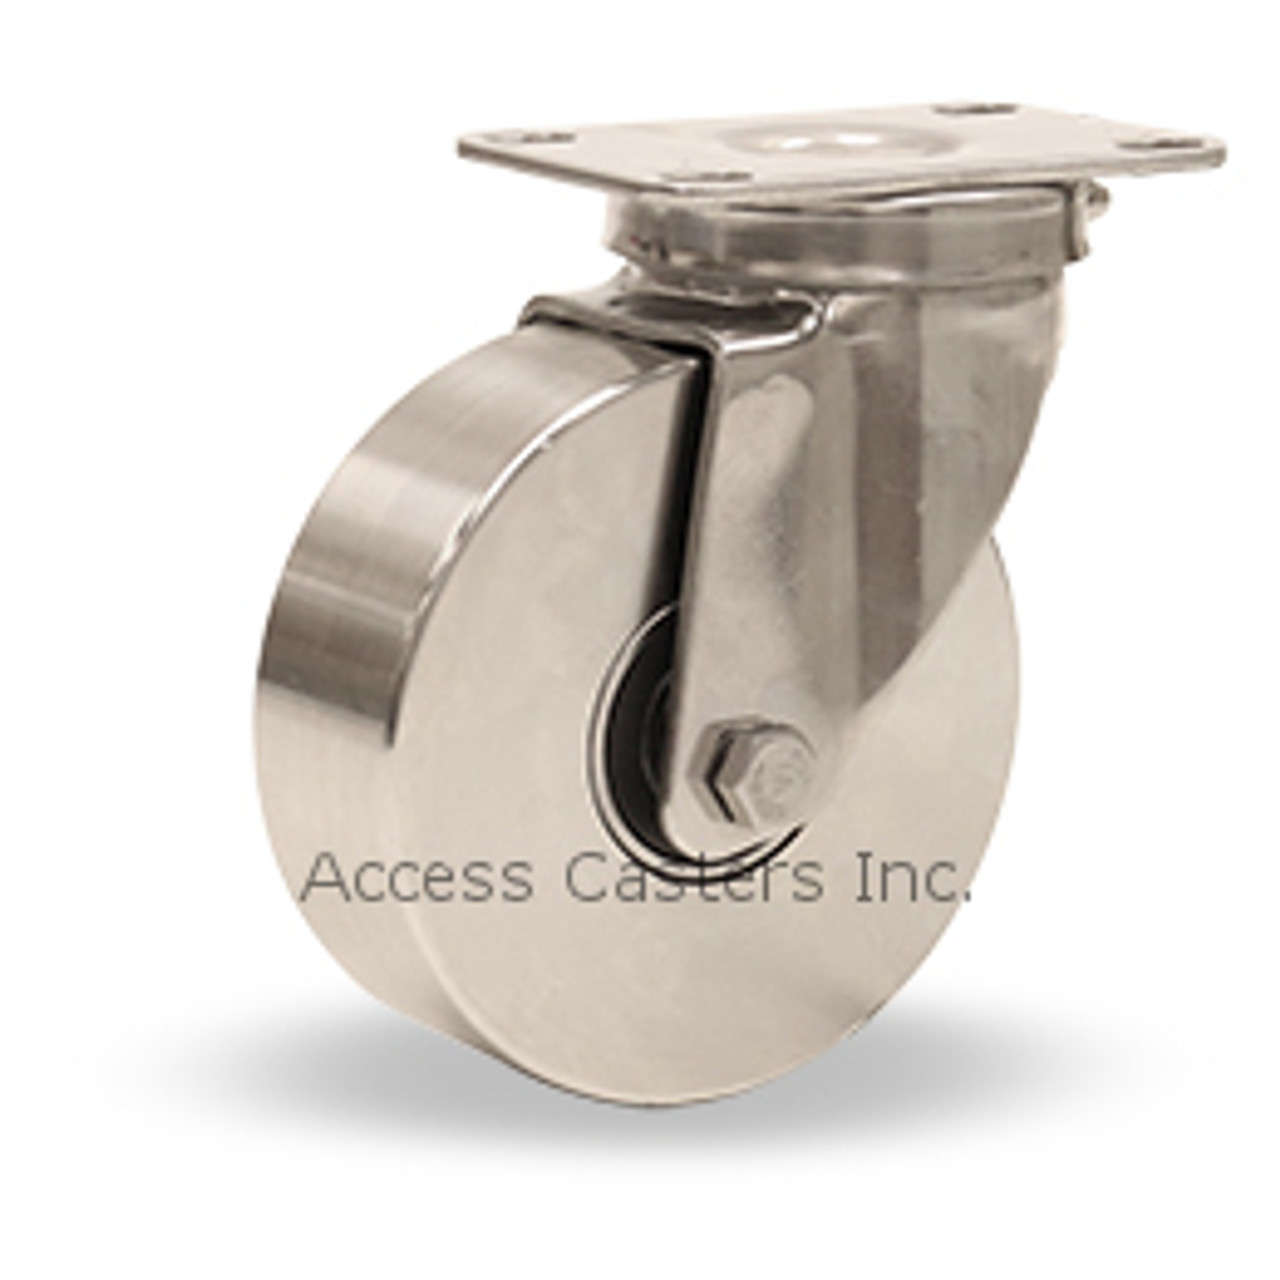 S-HSTL-4HSB 4" high temperature stainless steel caster with stainless steel